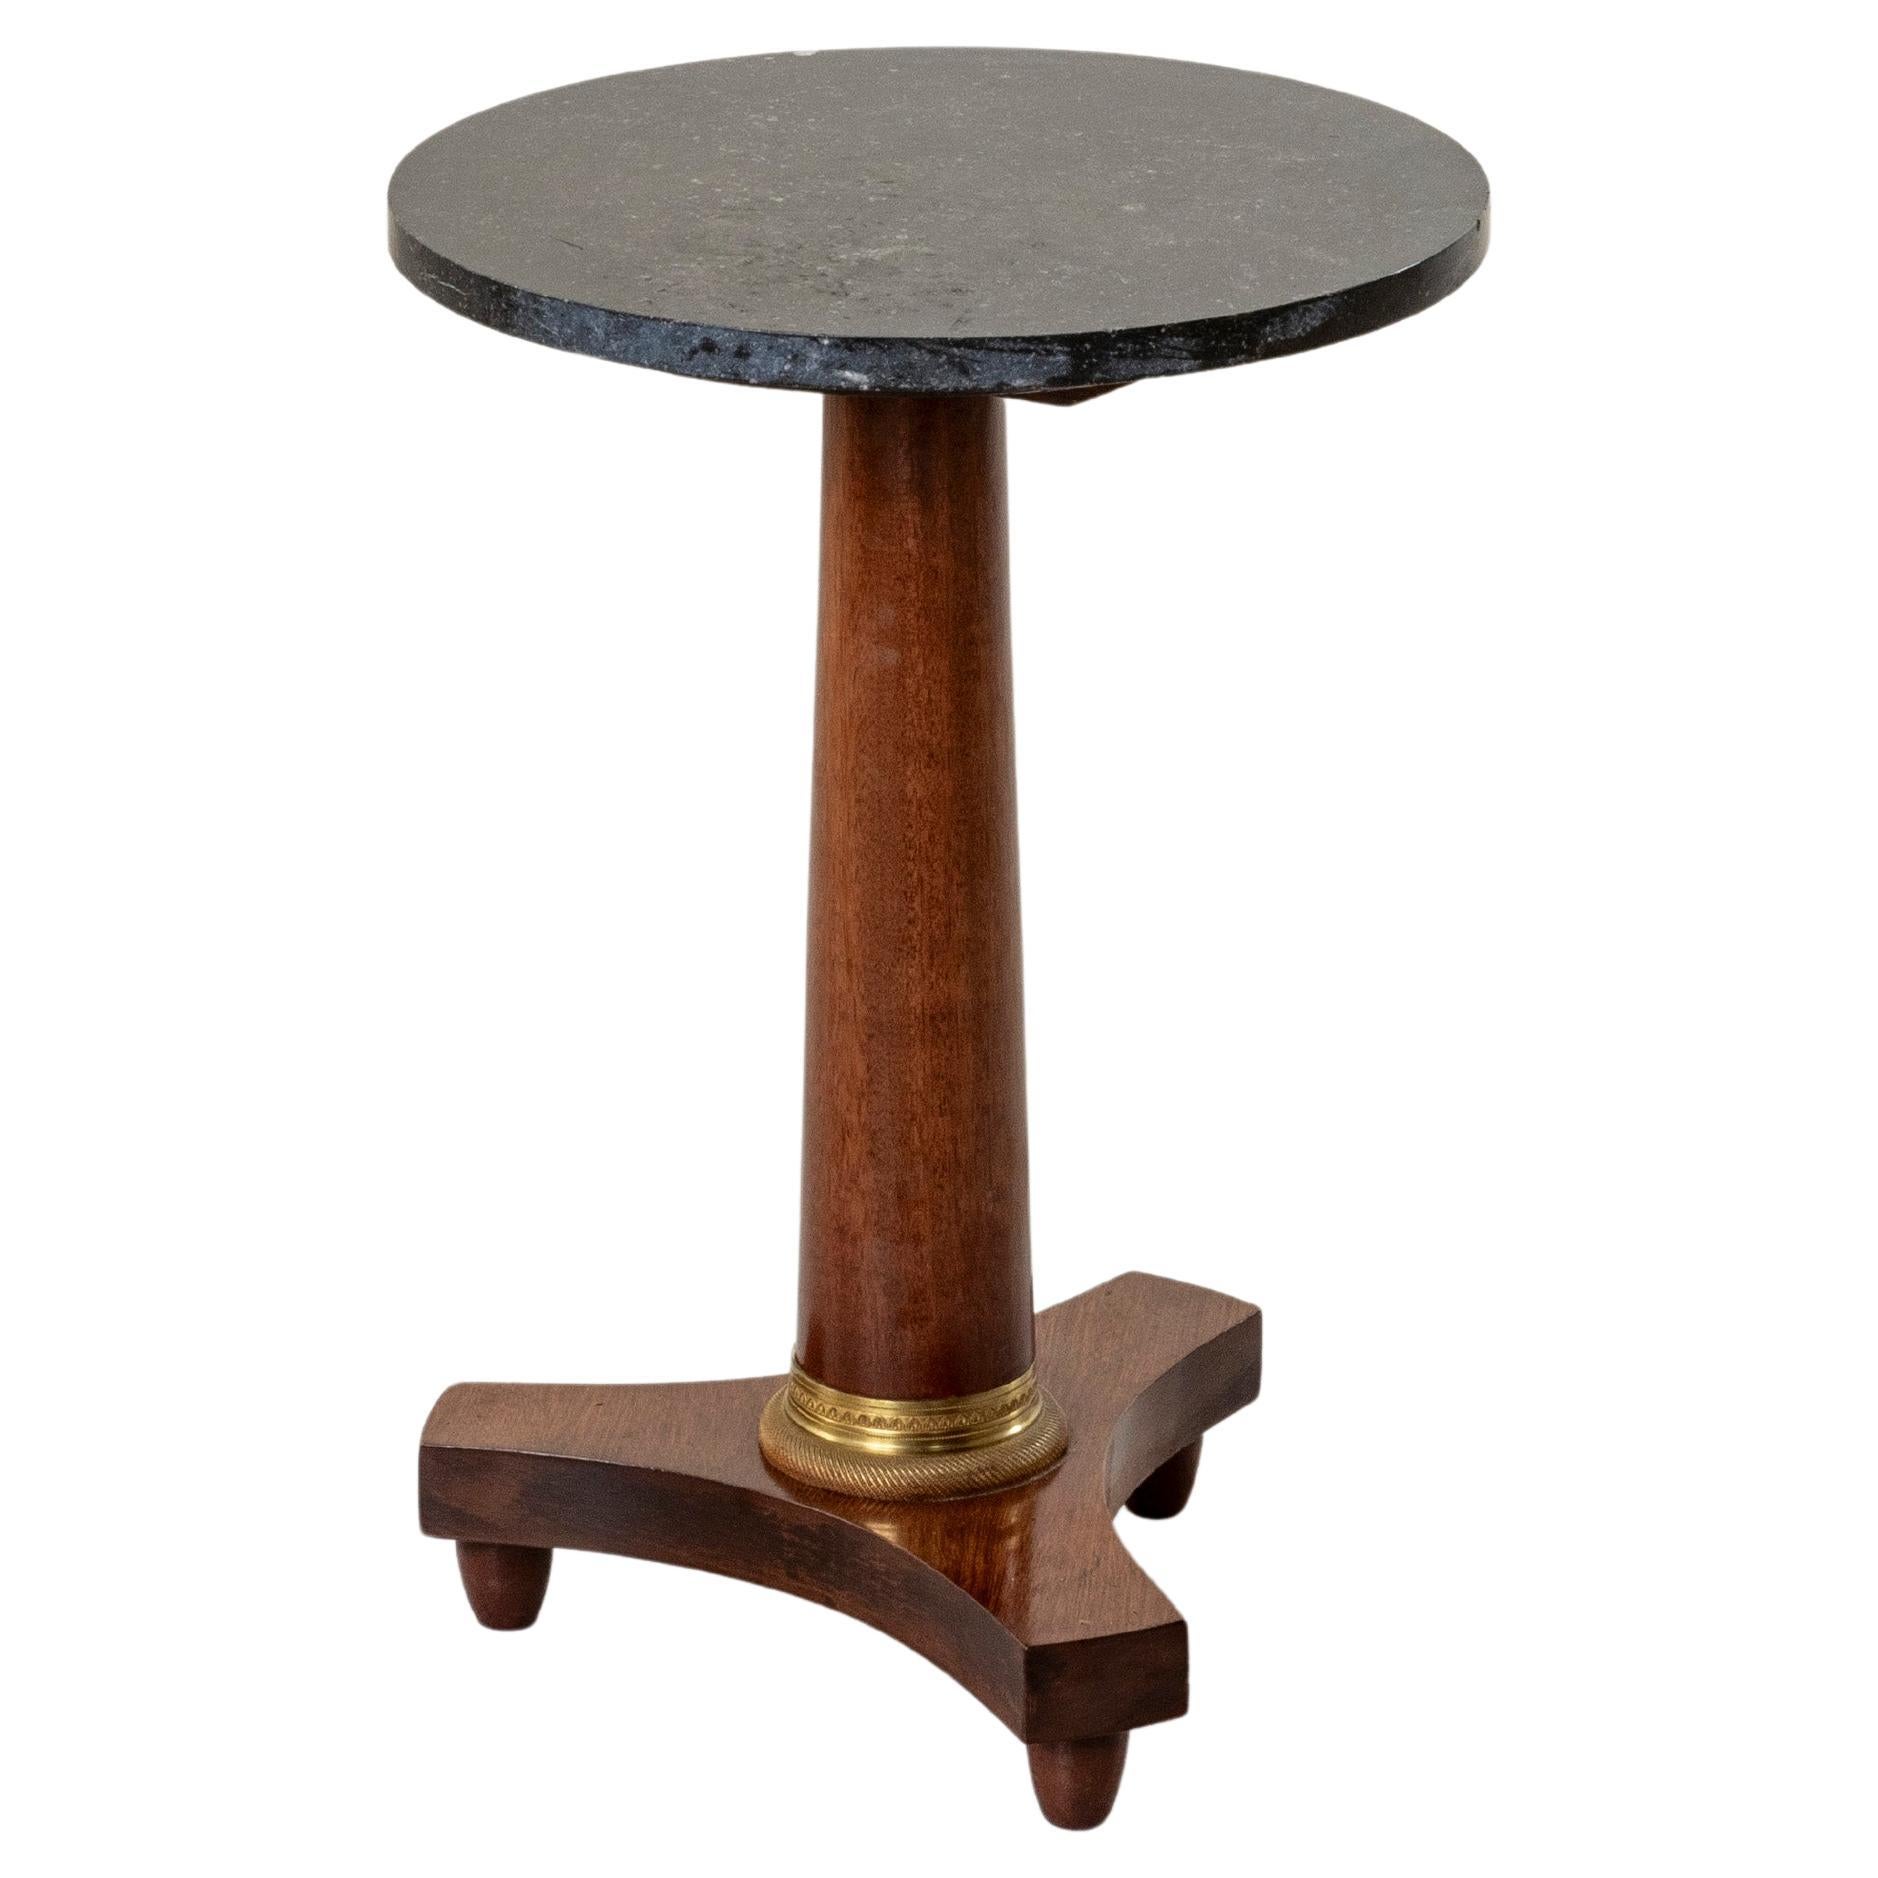 Late 19th Century French Empire Style Mahogany Side Table with Marble Top